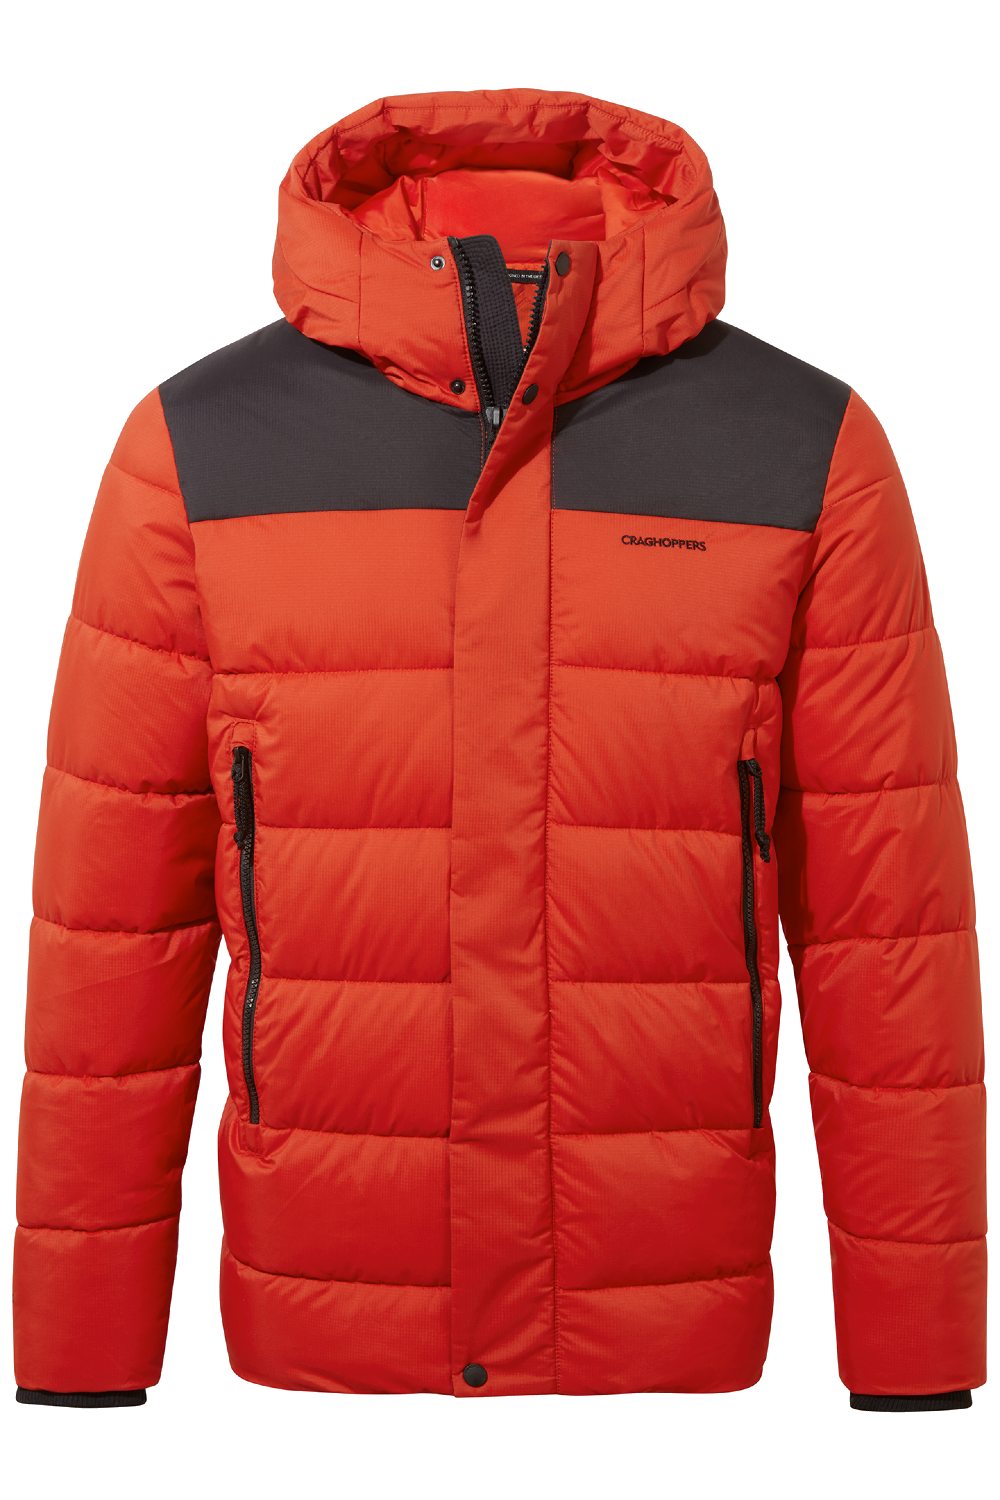 Craghoppers Sutherland Hooded Jacket in Chilli Red